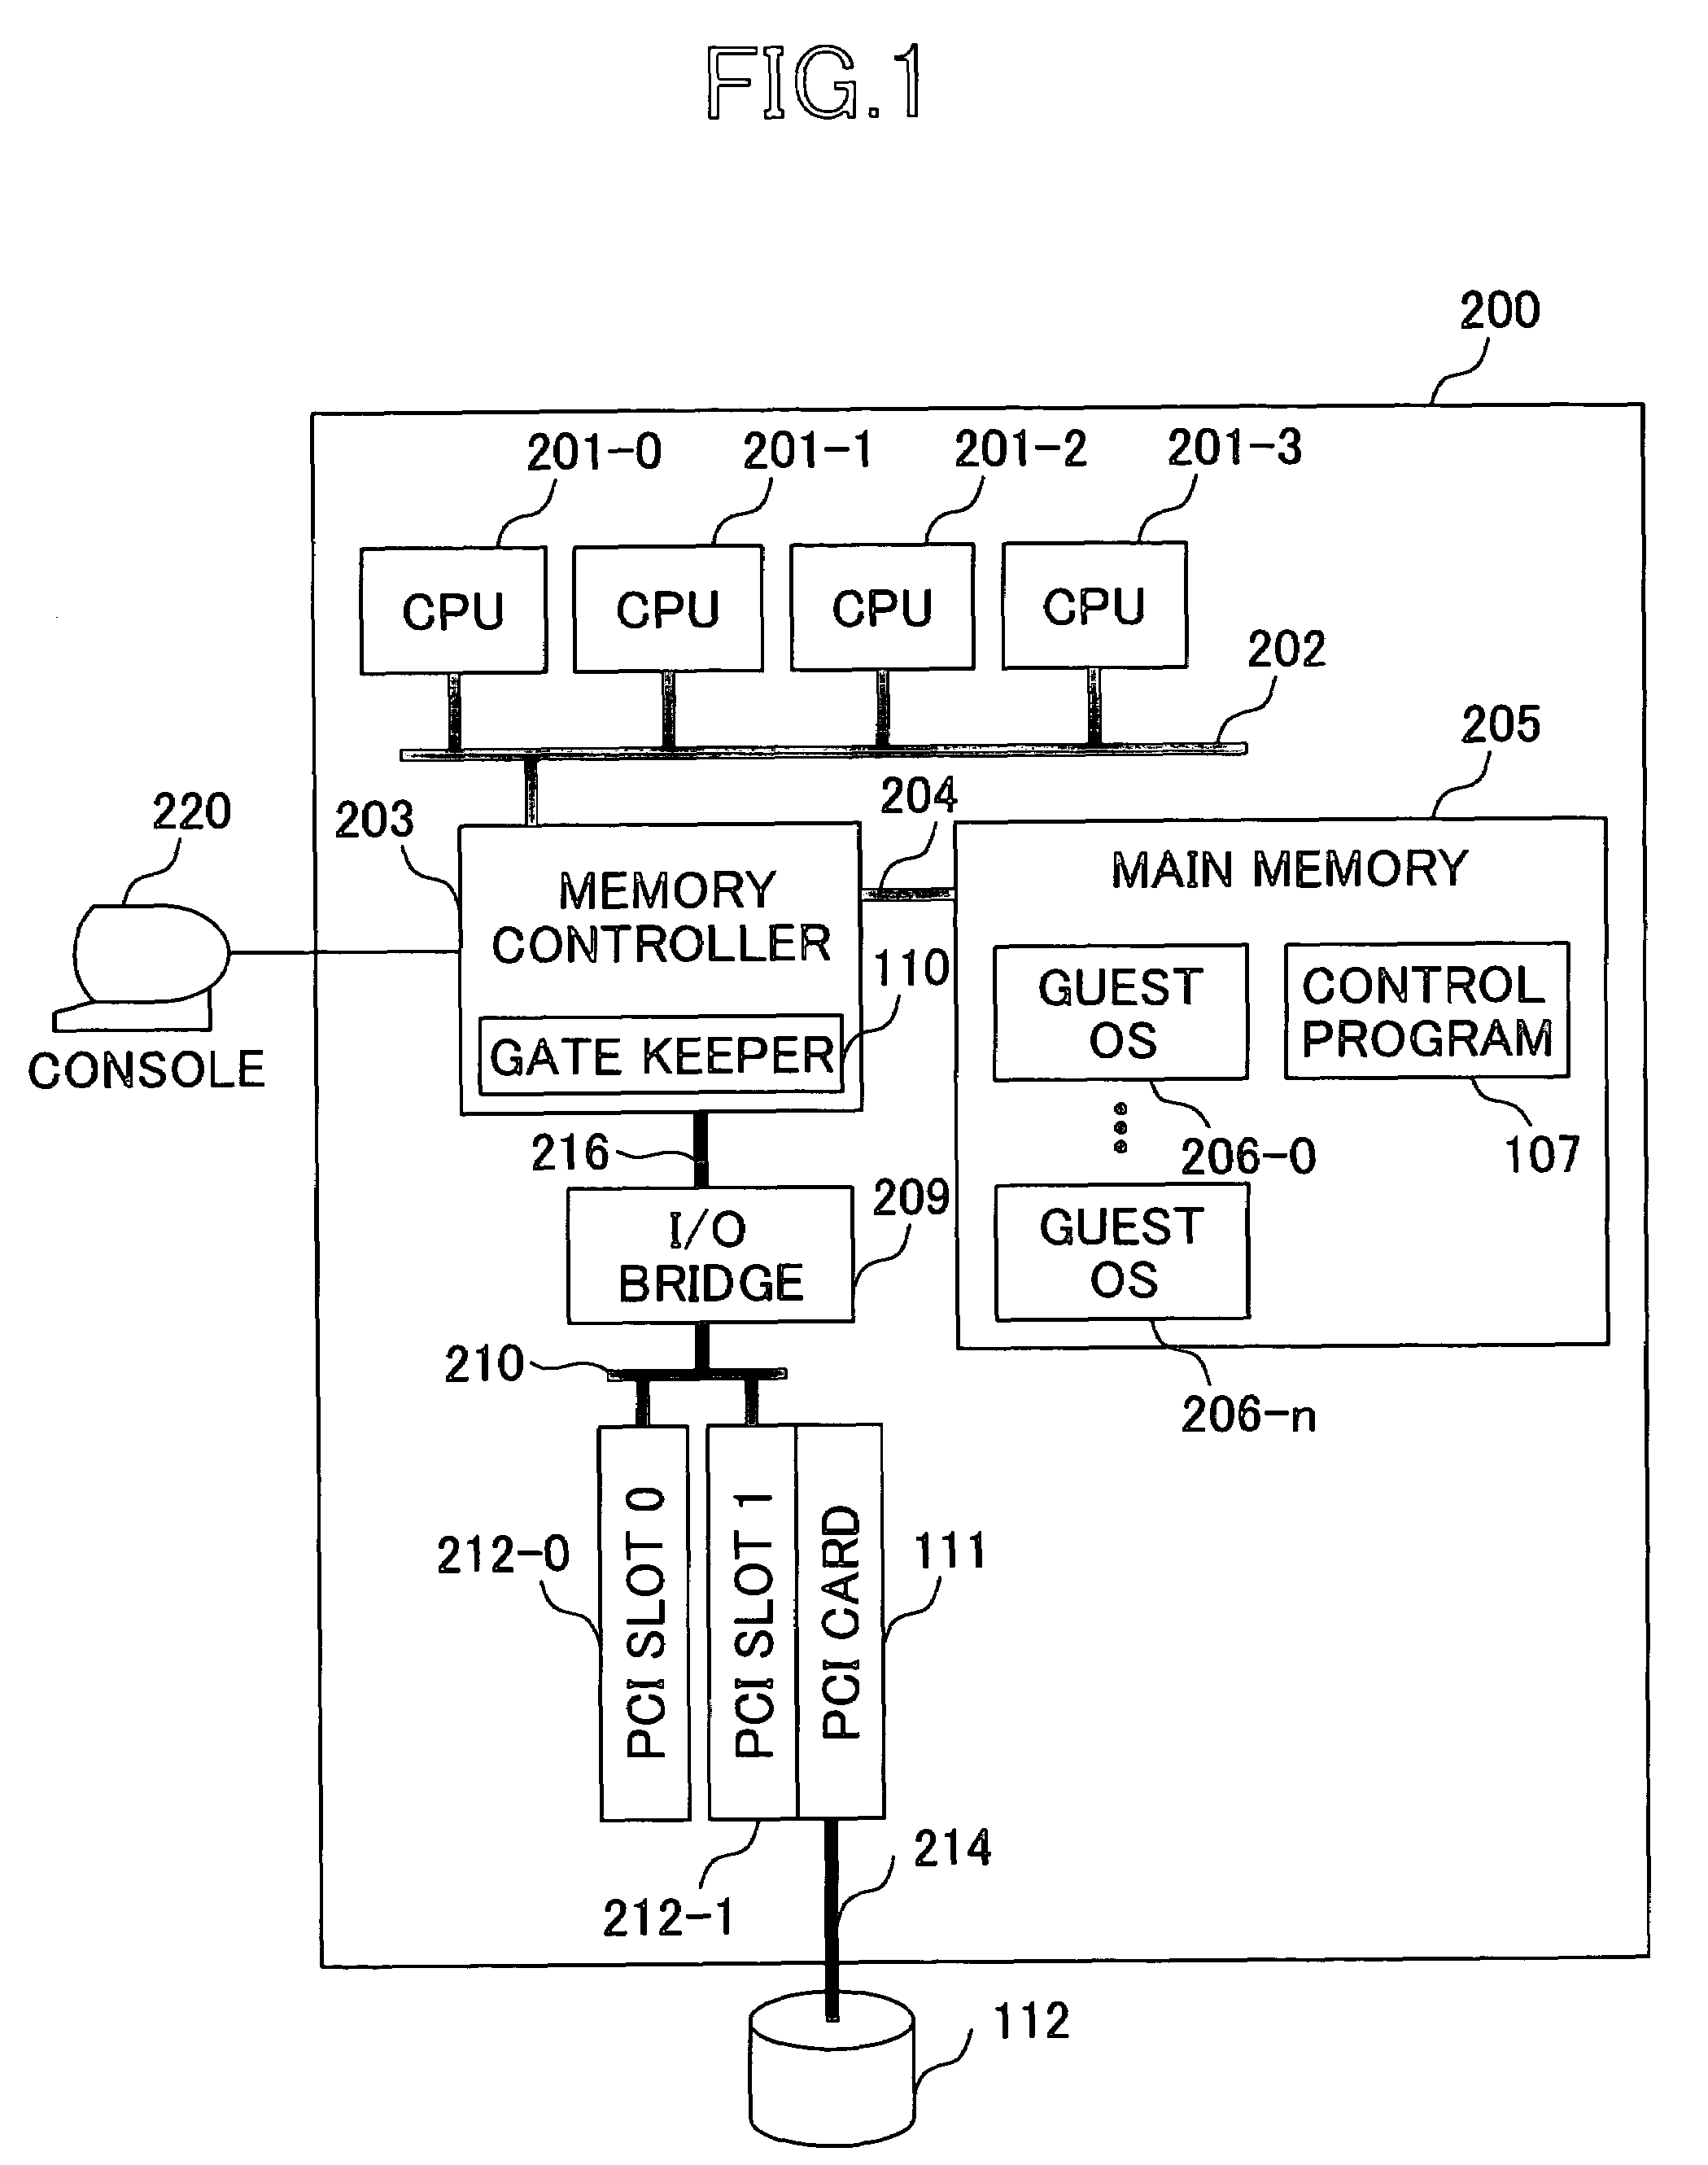 Fabric and method for sharing an I/O device among virtual machines formed in a computer system